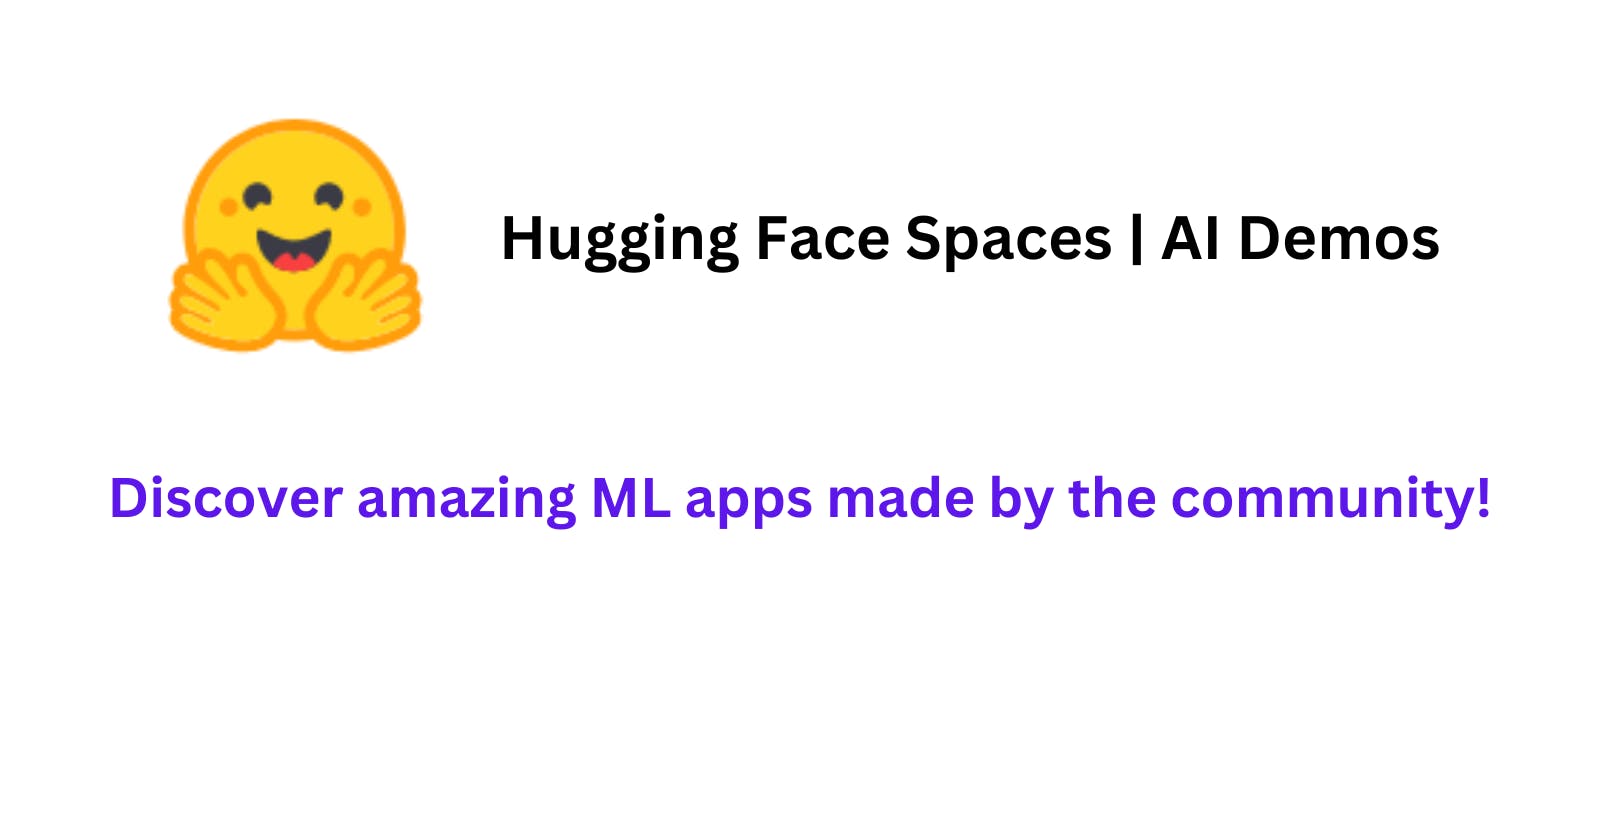 Top 10 Spaces on Hugging Face You Don't Want to Miss